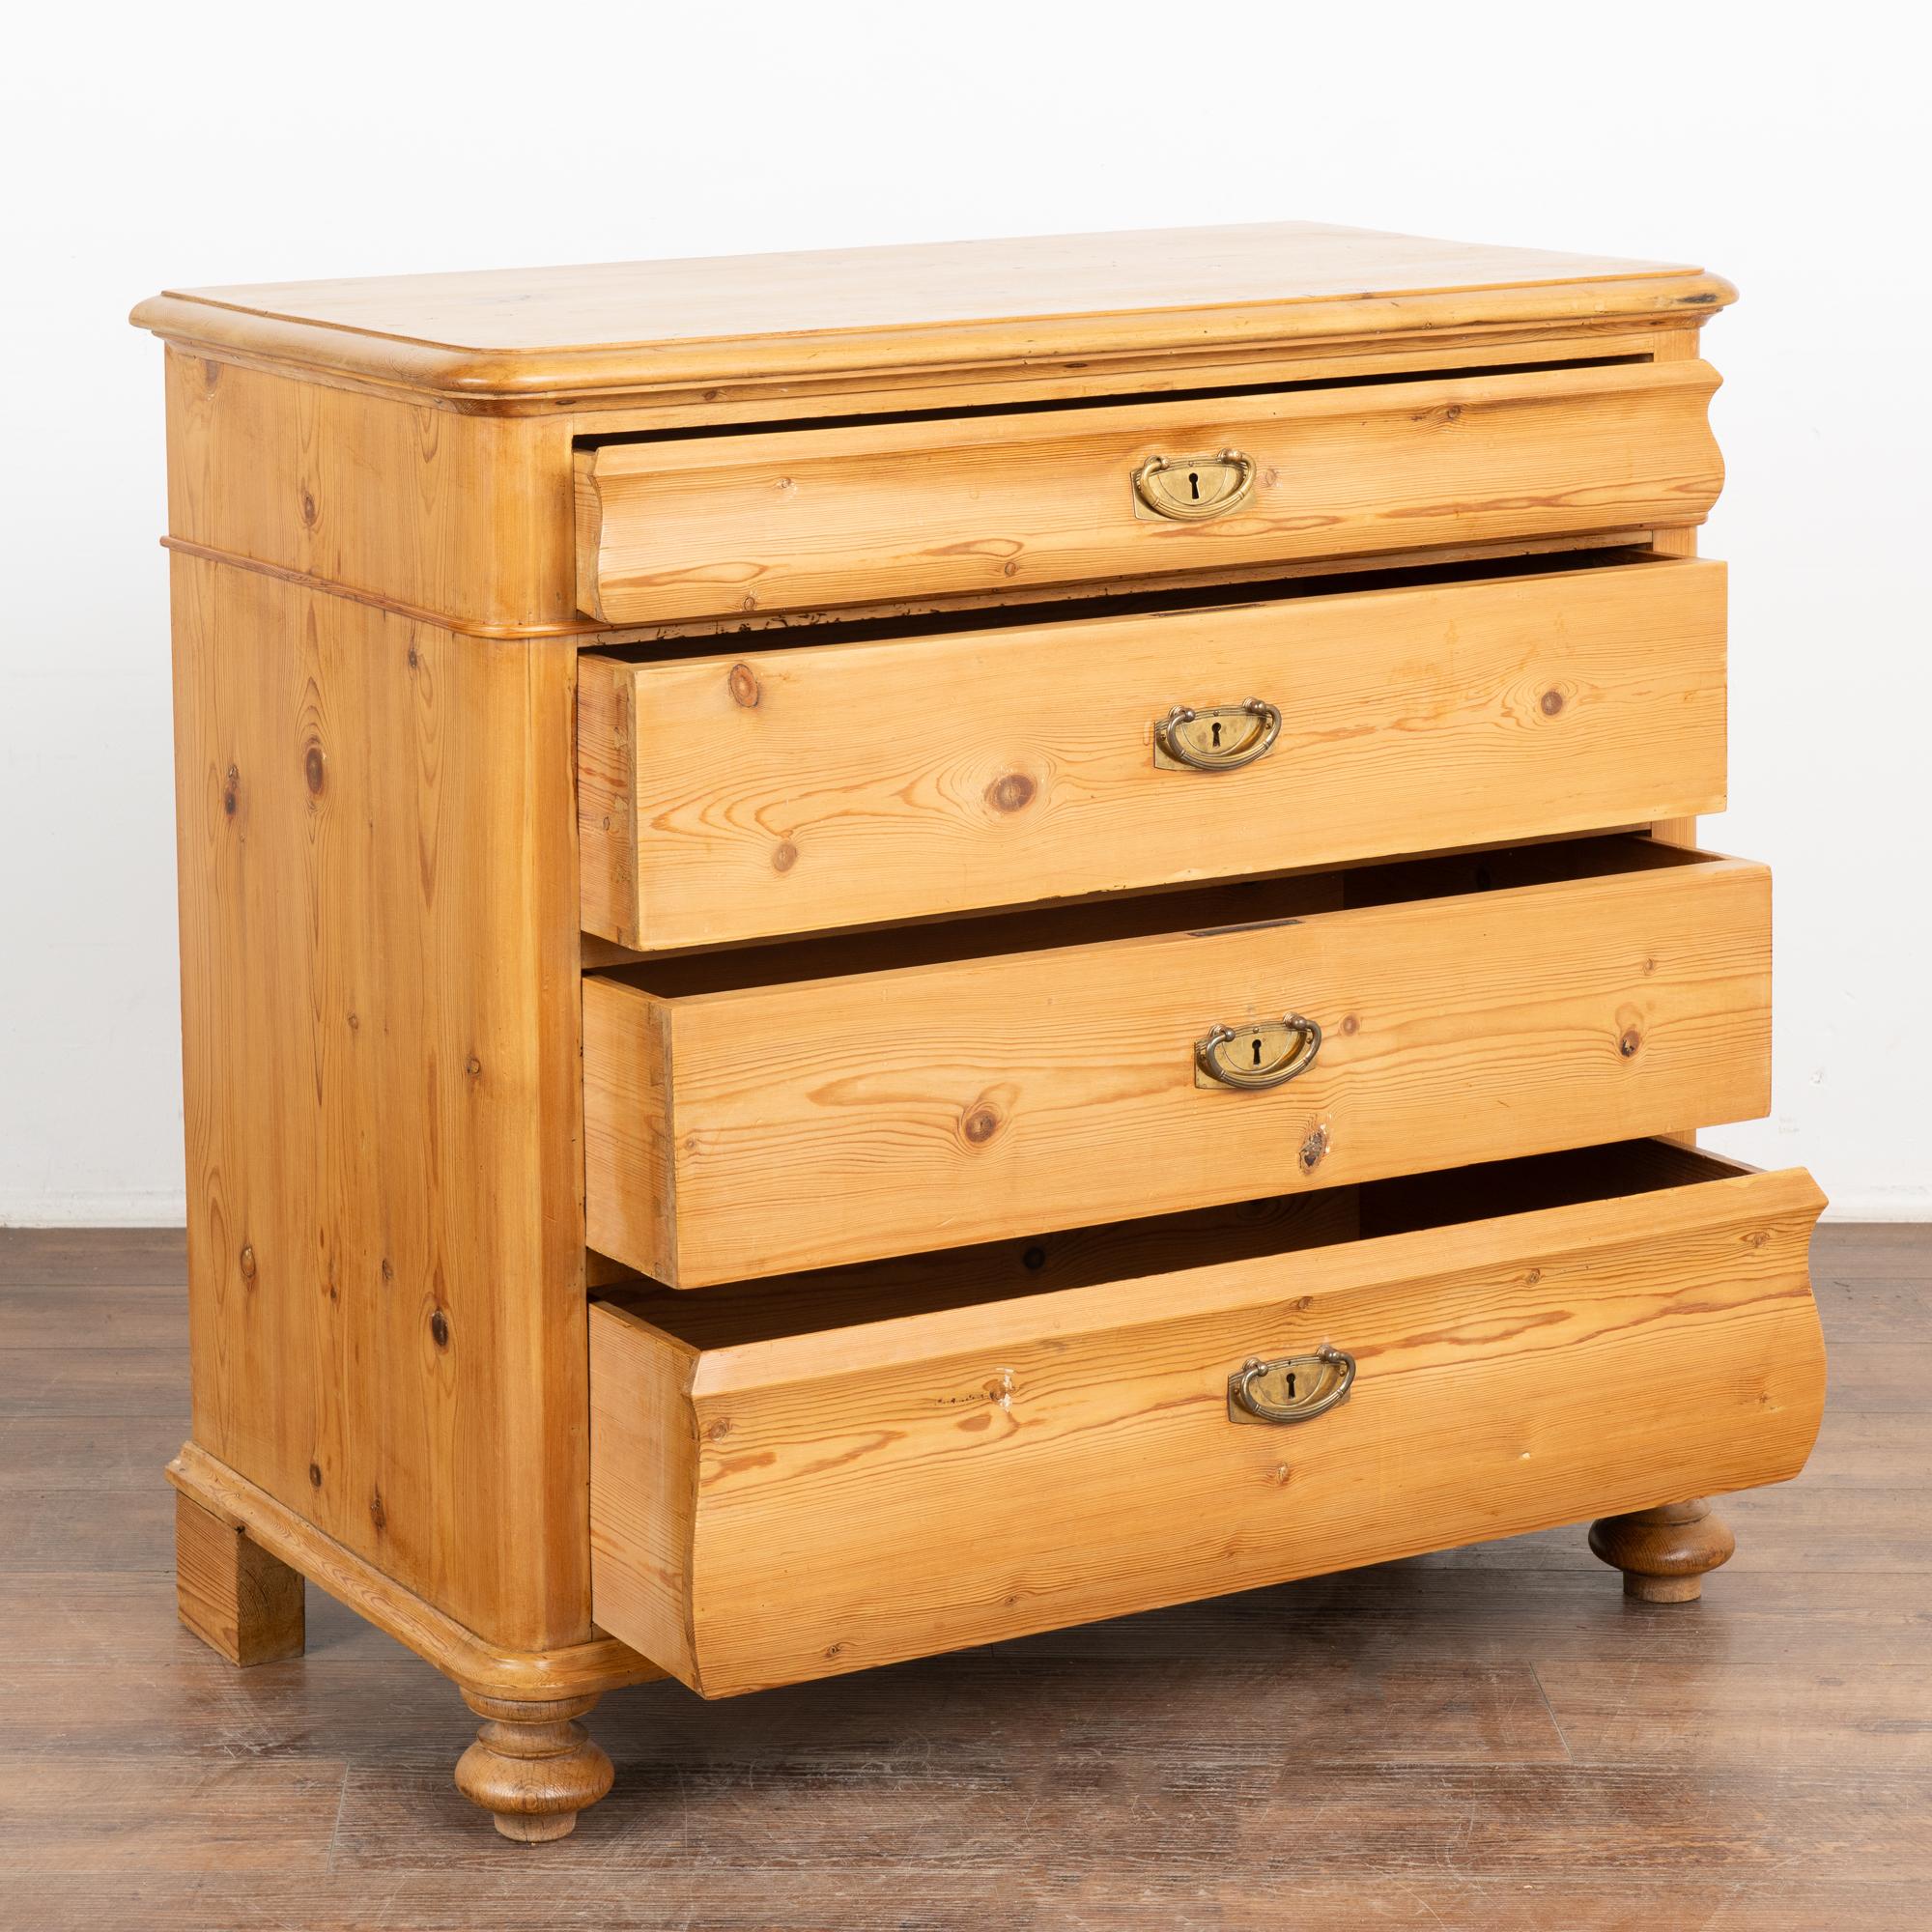 Country Pine Chest of Four Drawers, Denmark circa 1880